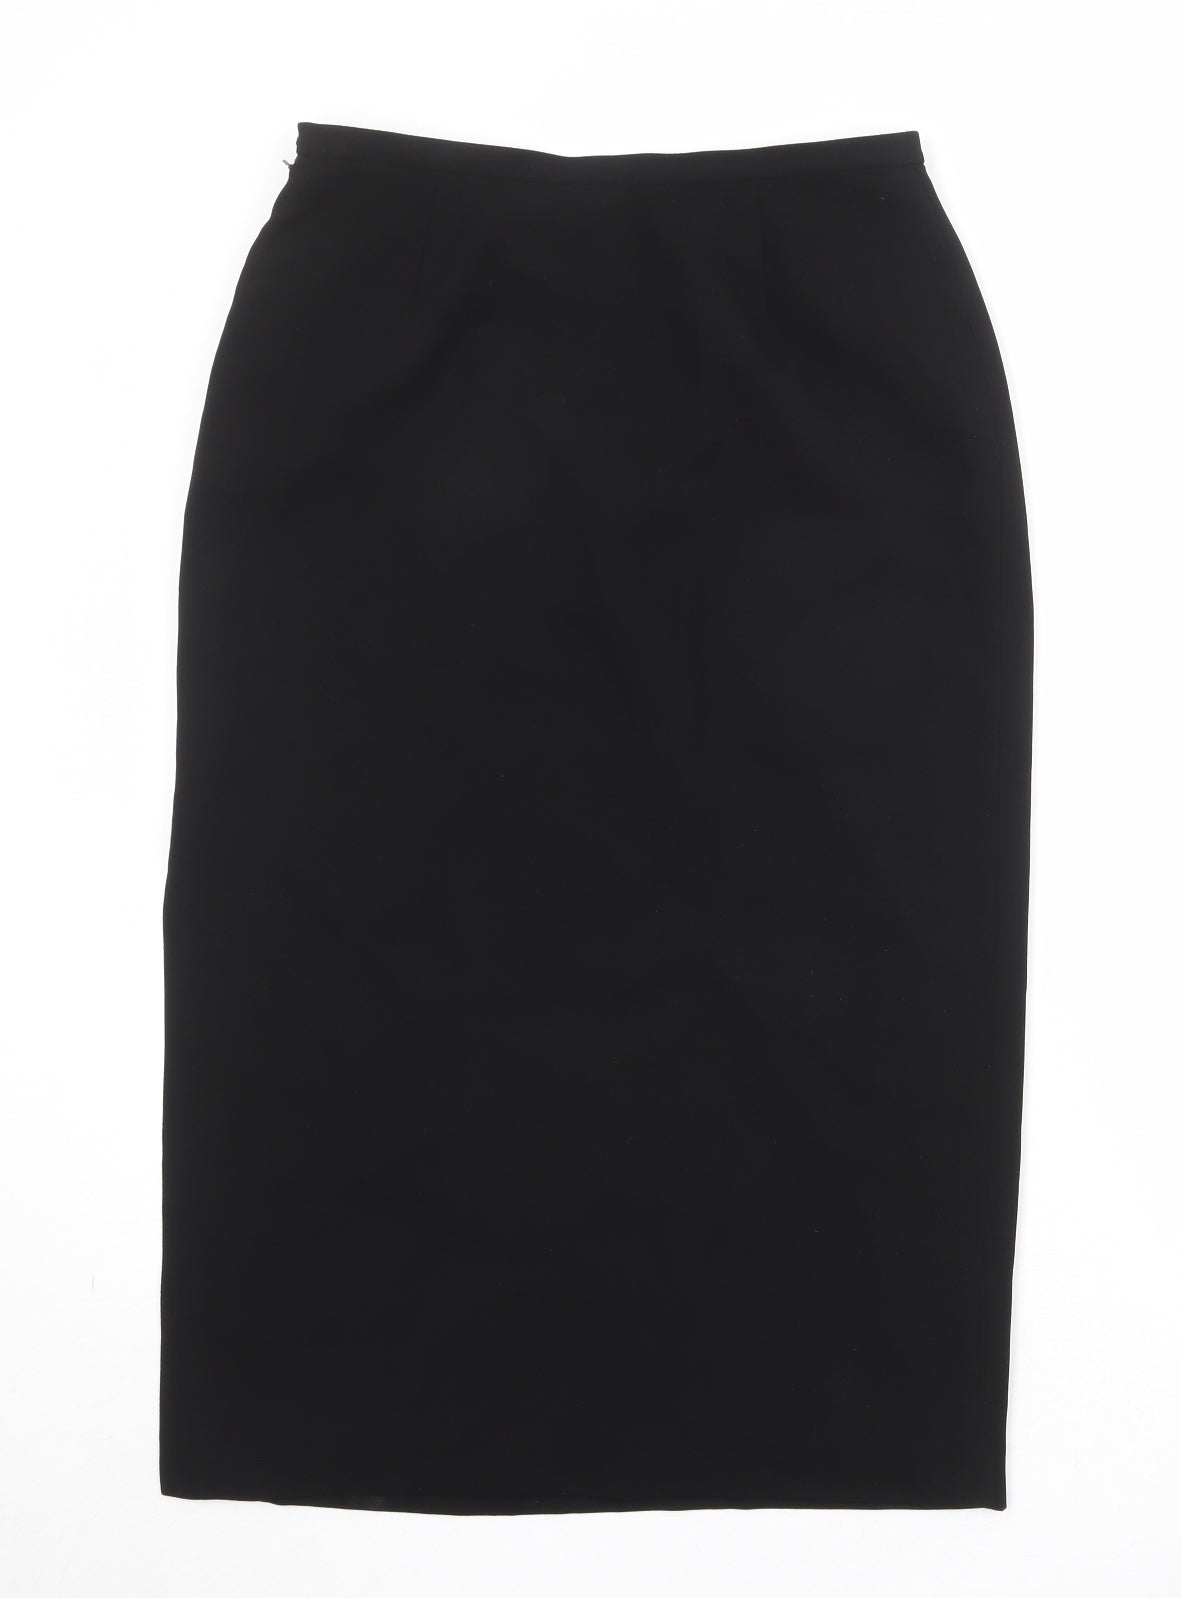 Anne Brooks Womens Black Polyester A-Line Skirt Size 14 Zip